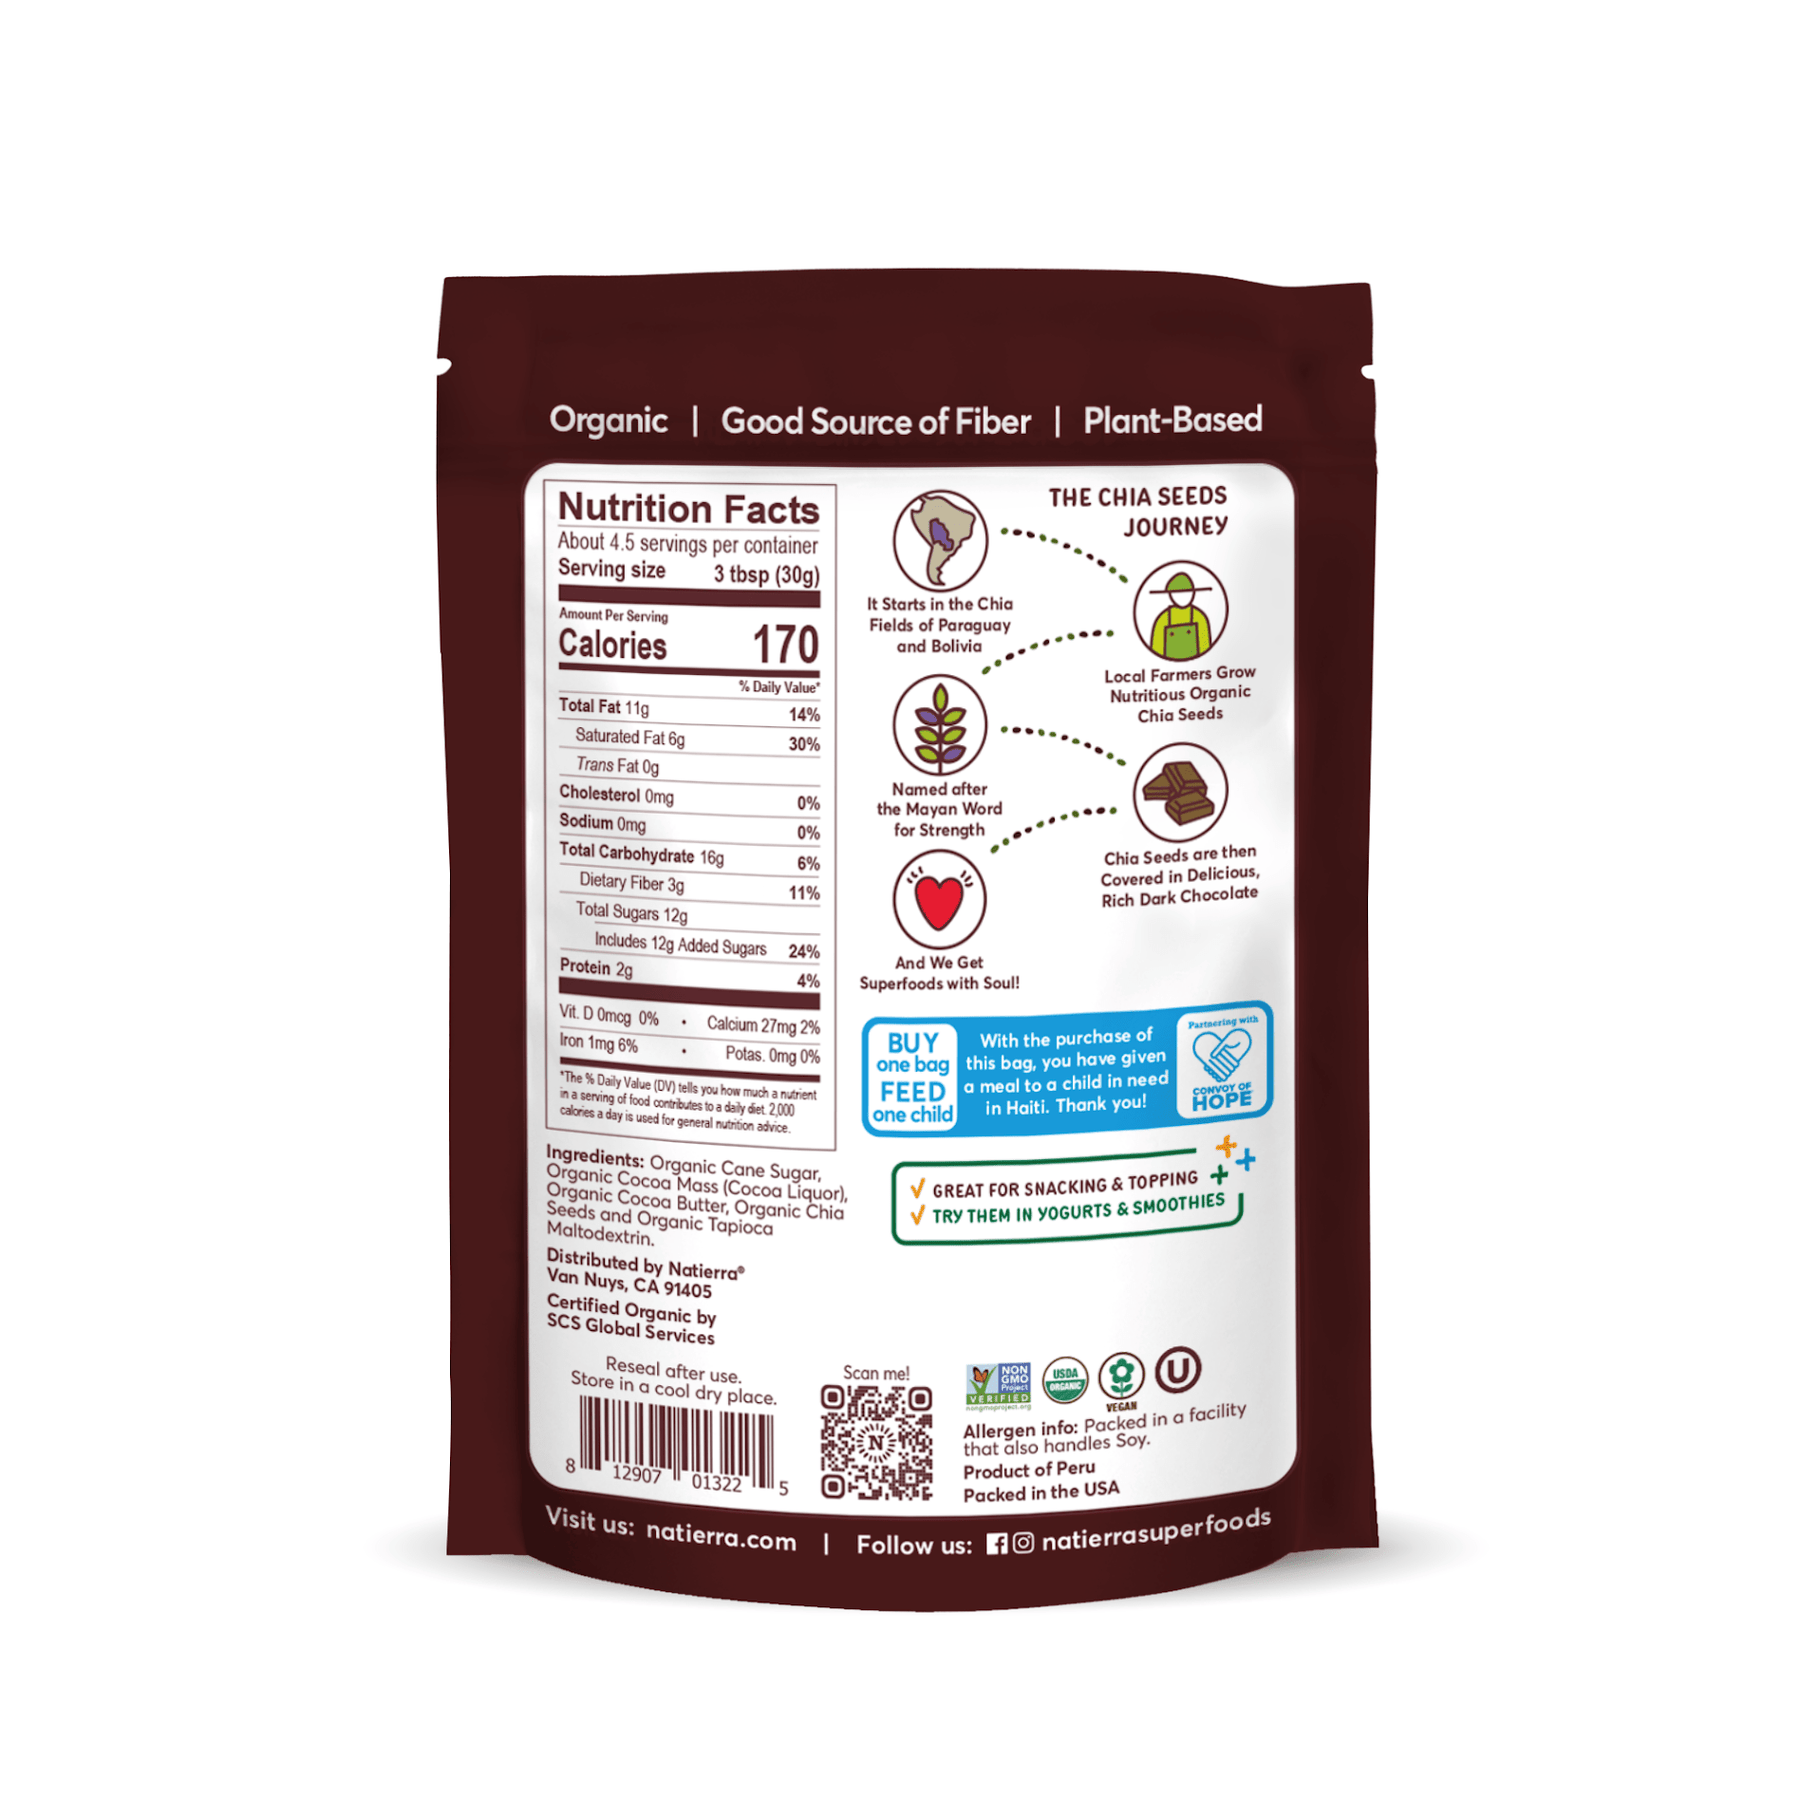 Natierra Dark Chocolate Chia Seeds Bag with nutrition facts, journey and main product claims